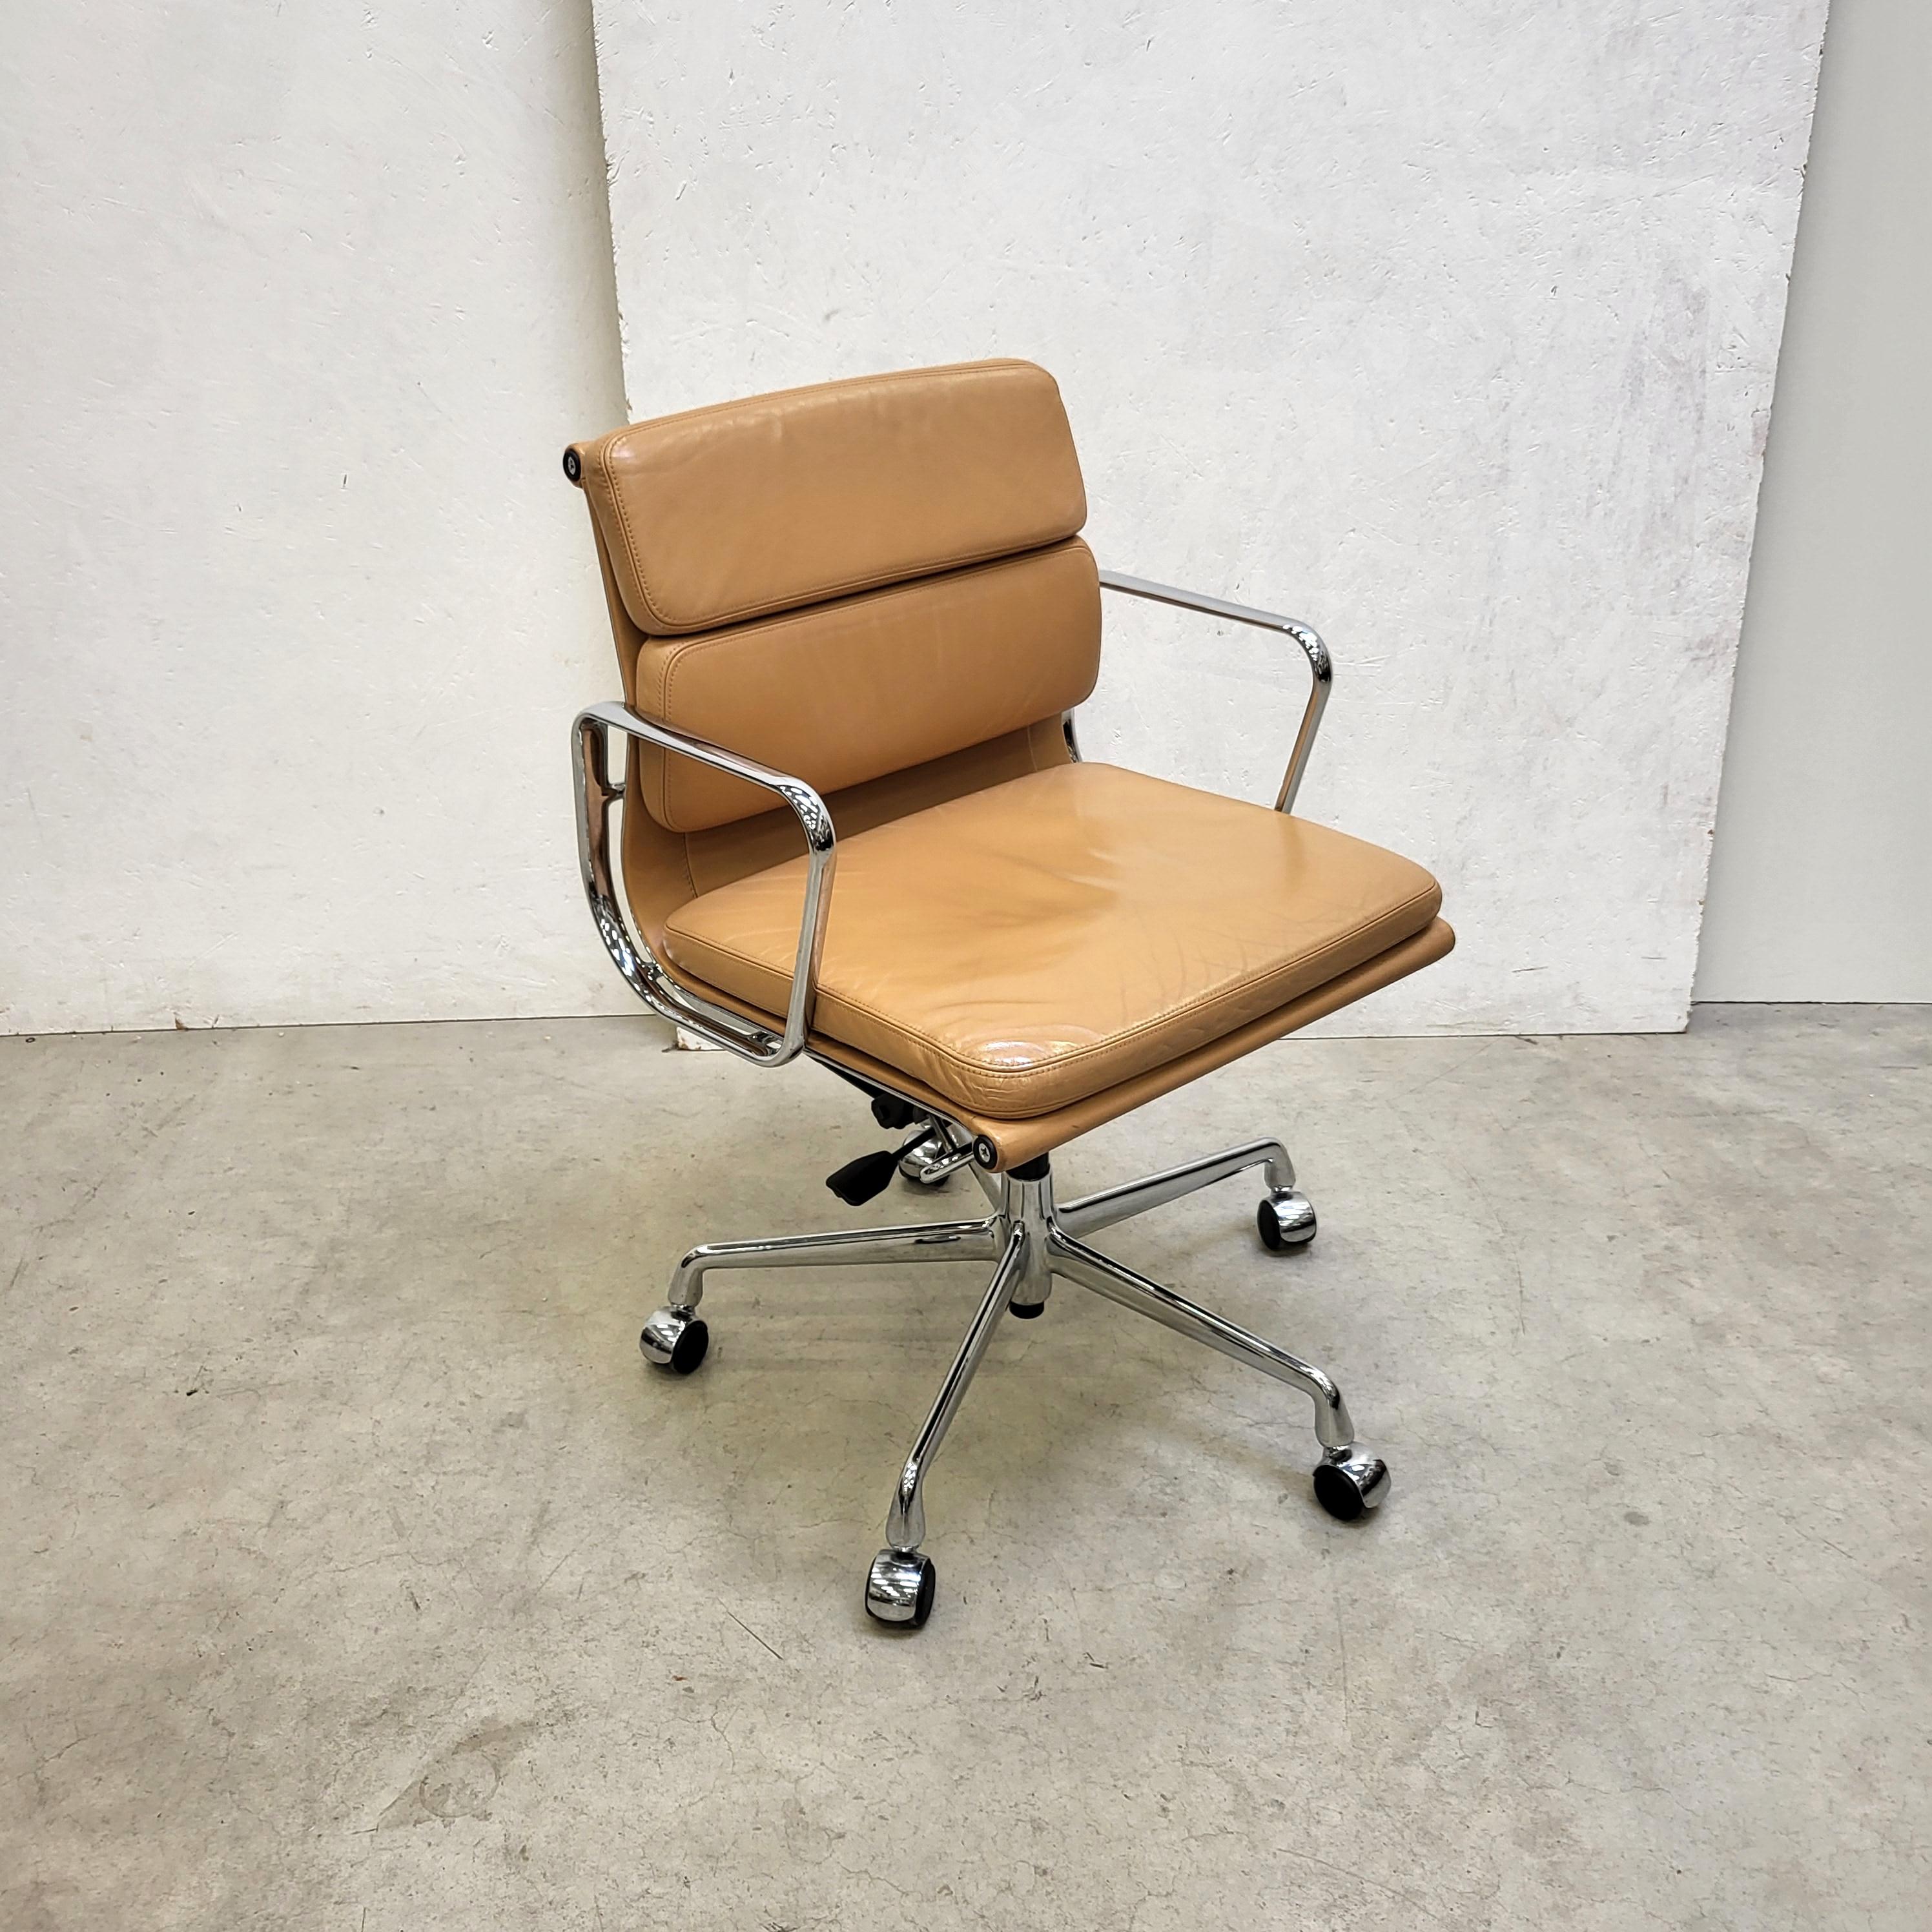 Rare premium Cognac soft pad office chair model EA217 produced by Vitra. 
The chair features a chromed aluminium frame and was made in 2003.

All chairs are height adjustable and having a tilt mechanism.

We have 5x chairs available!

It is the